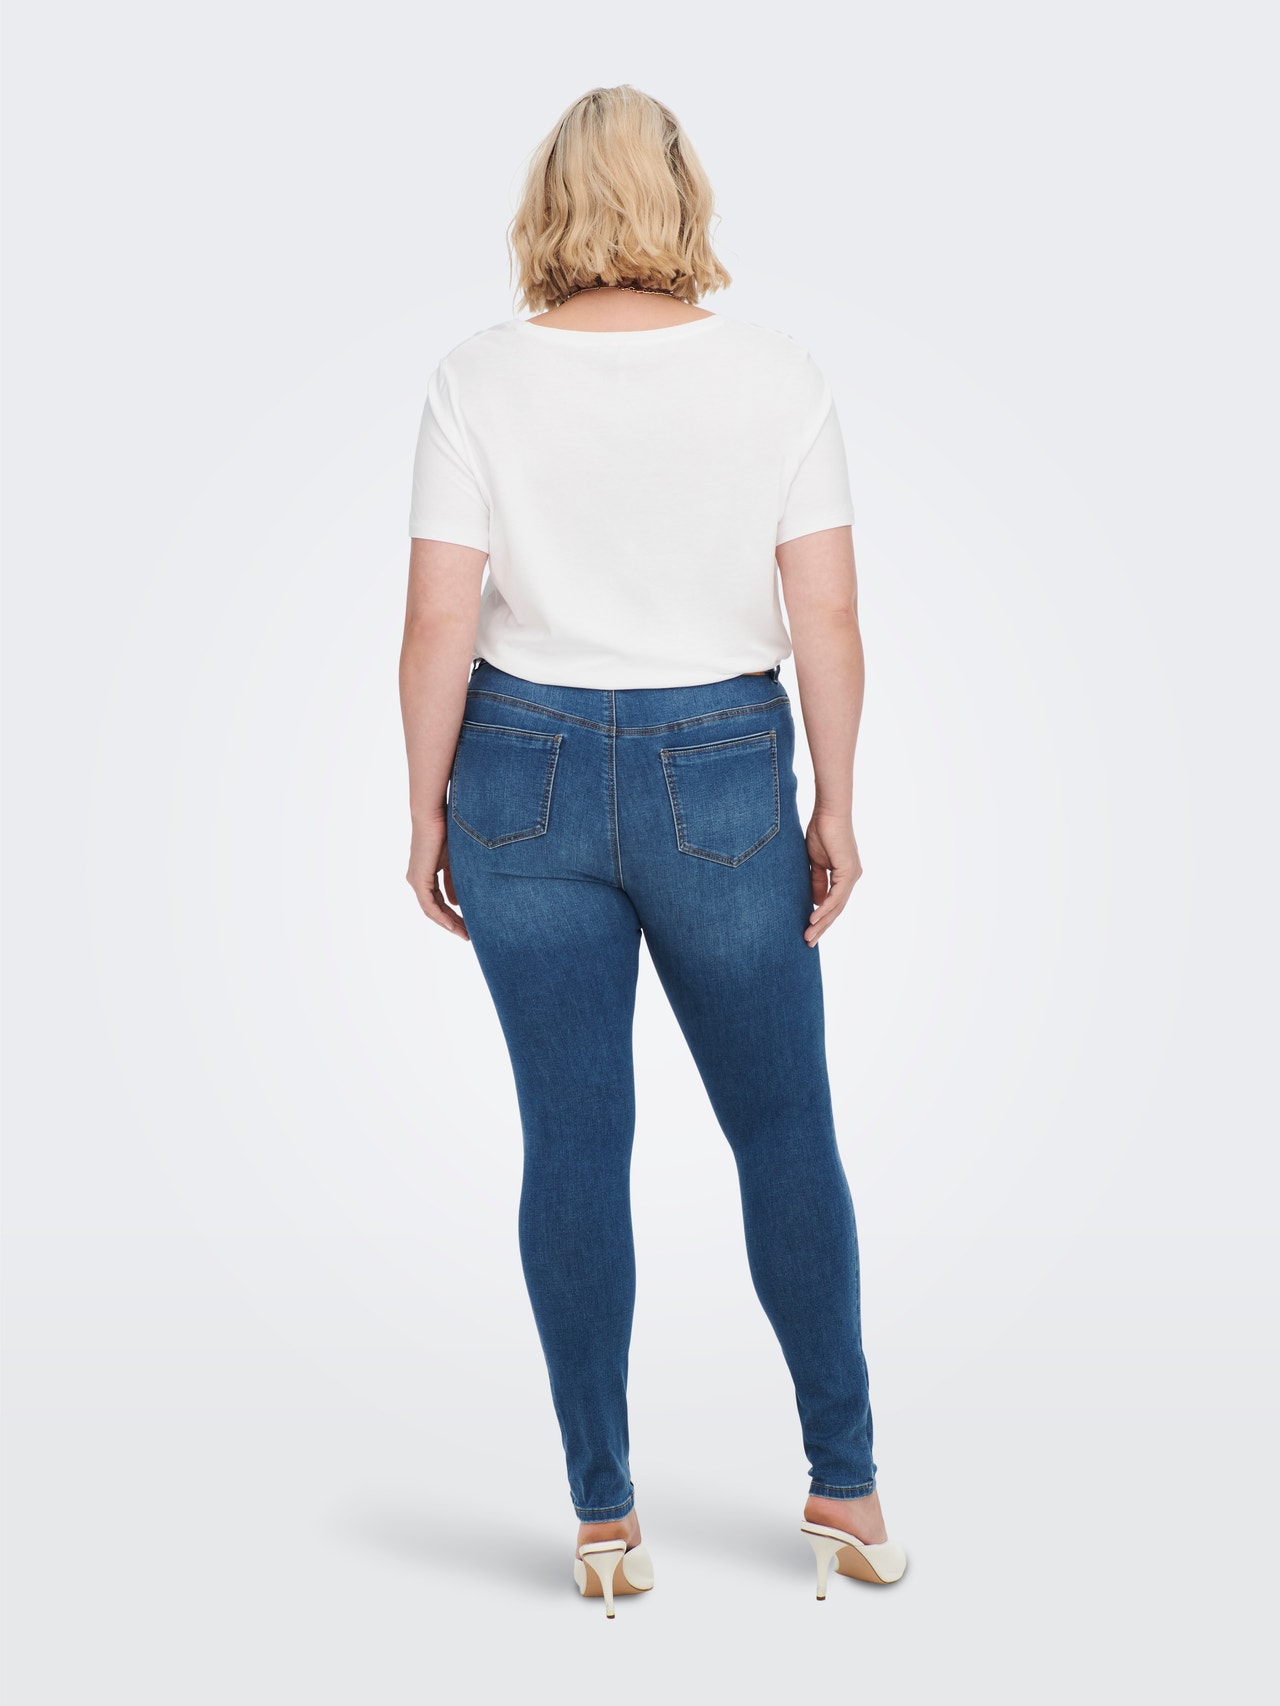 ONLY Jeans Skinny Fit Taille moyenne Curve -Medium Blue Denim - 15263094